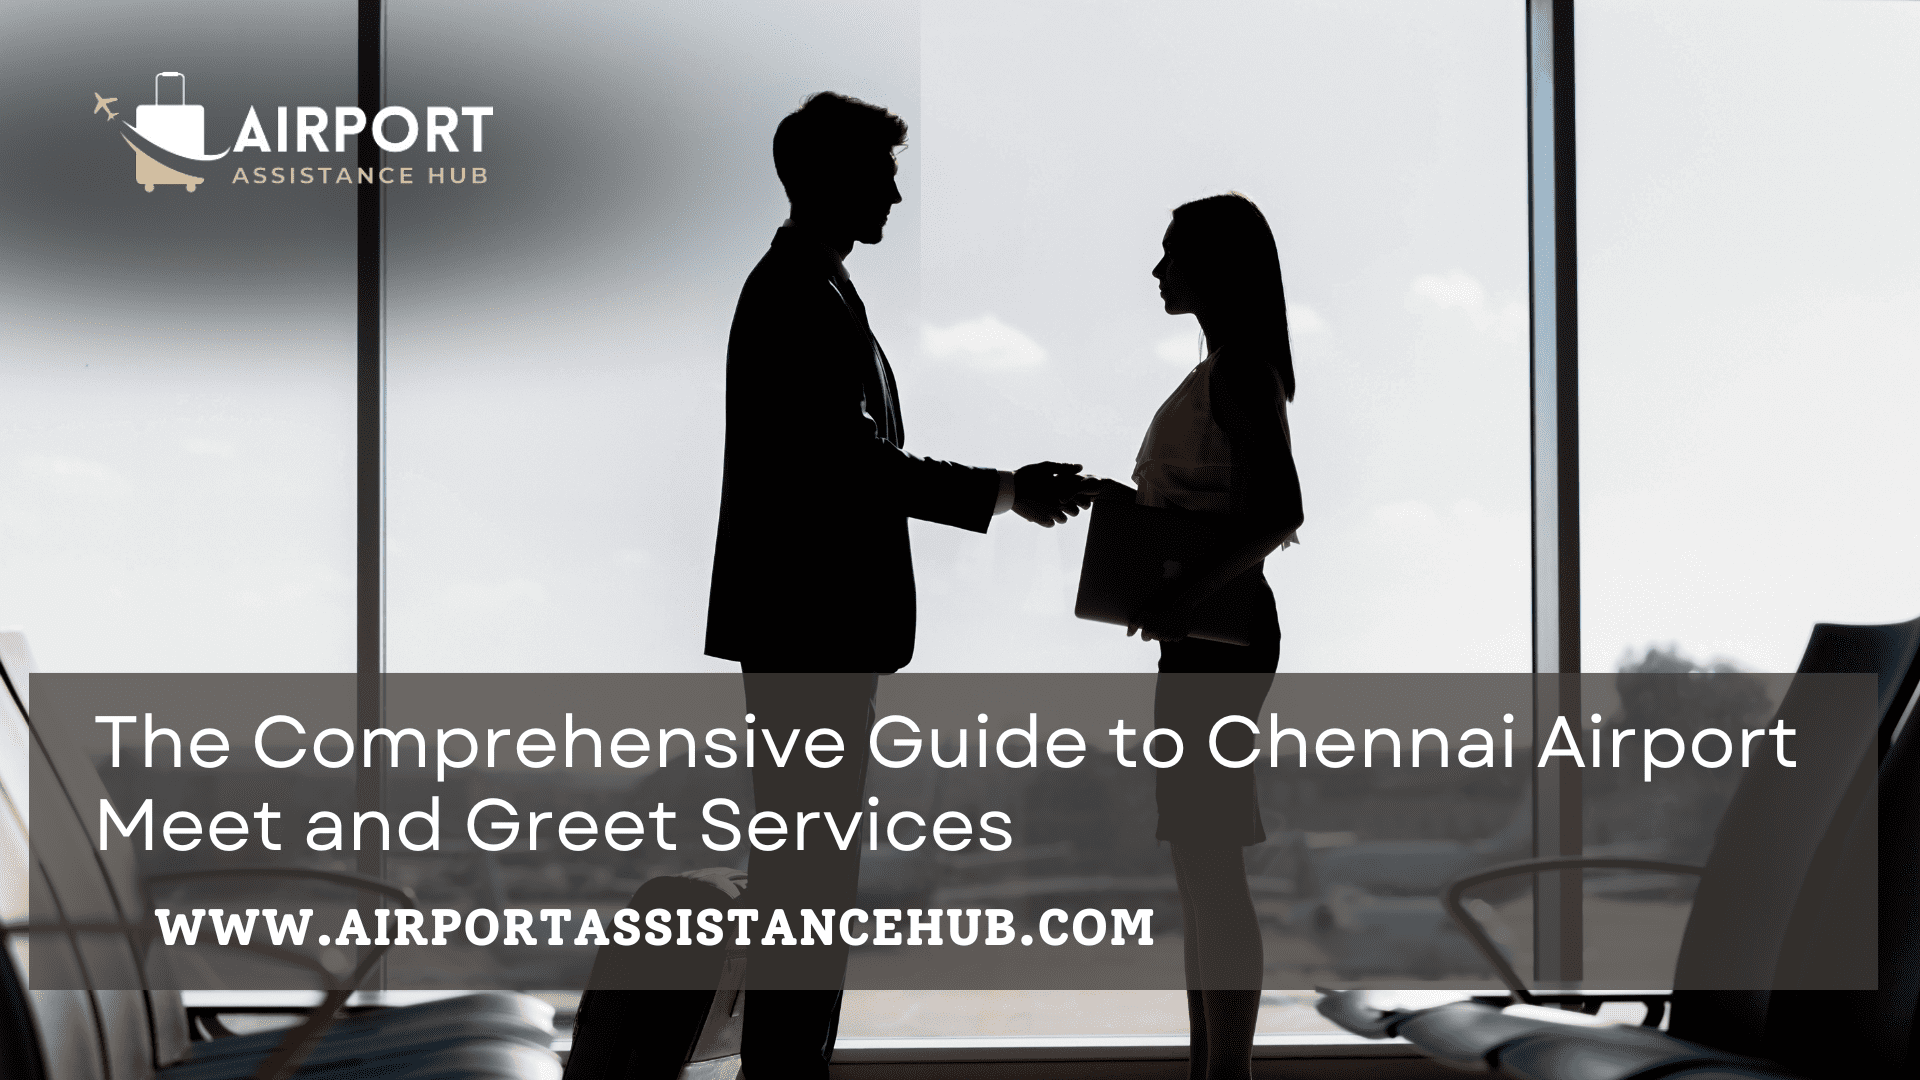 The Comprehensive Guide to Chennai Airport Meet and Greet Services